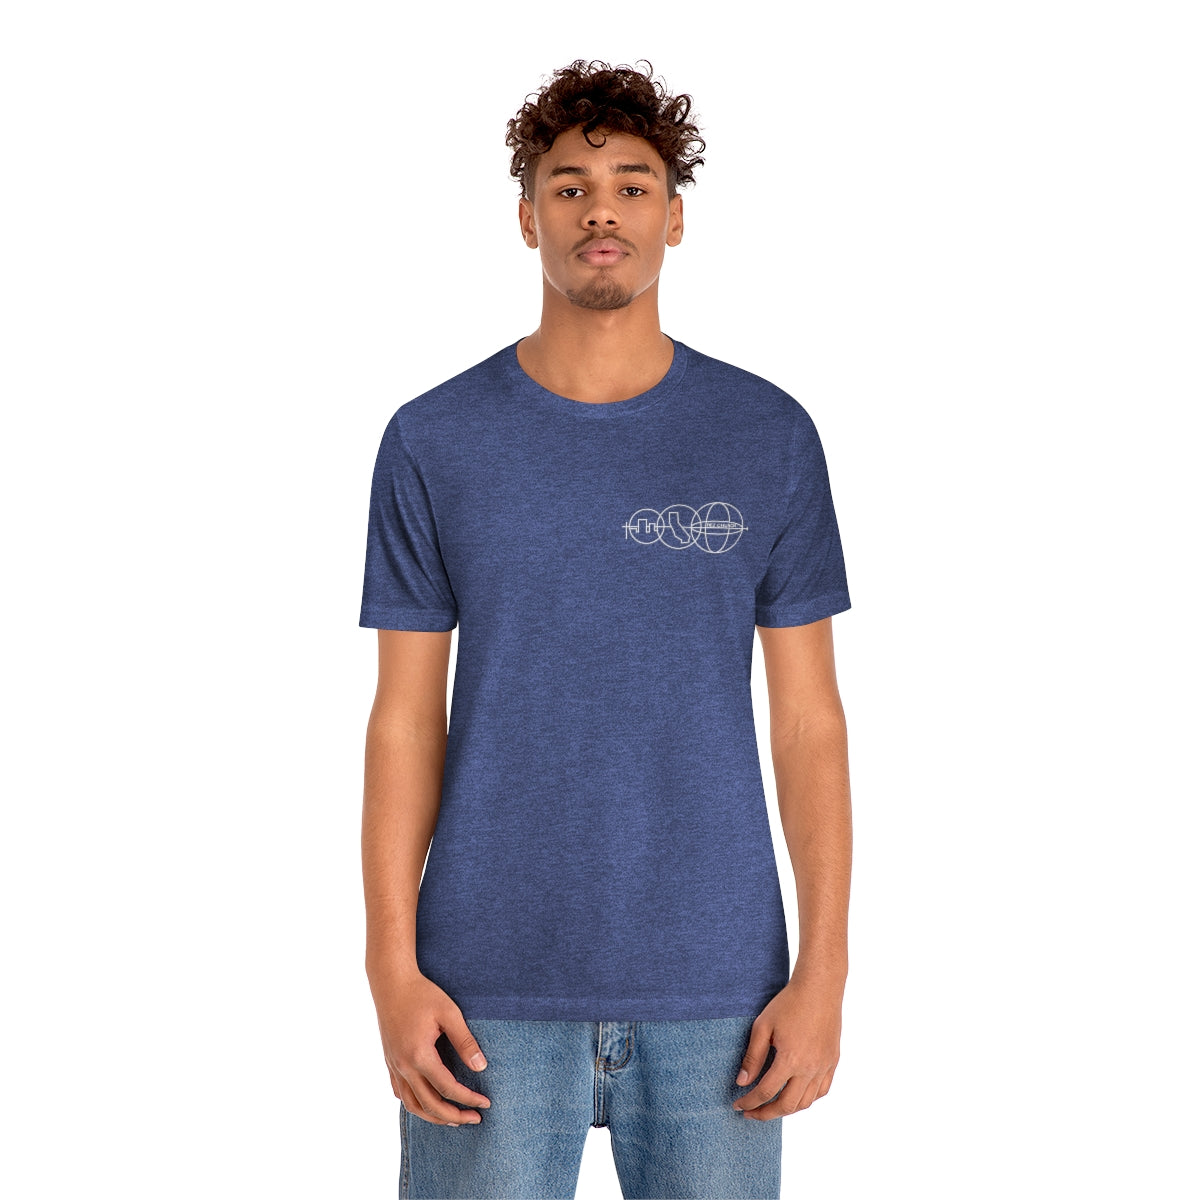 City State Earth - Unisex Jersey Short Sleeve Tee